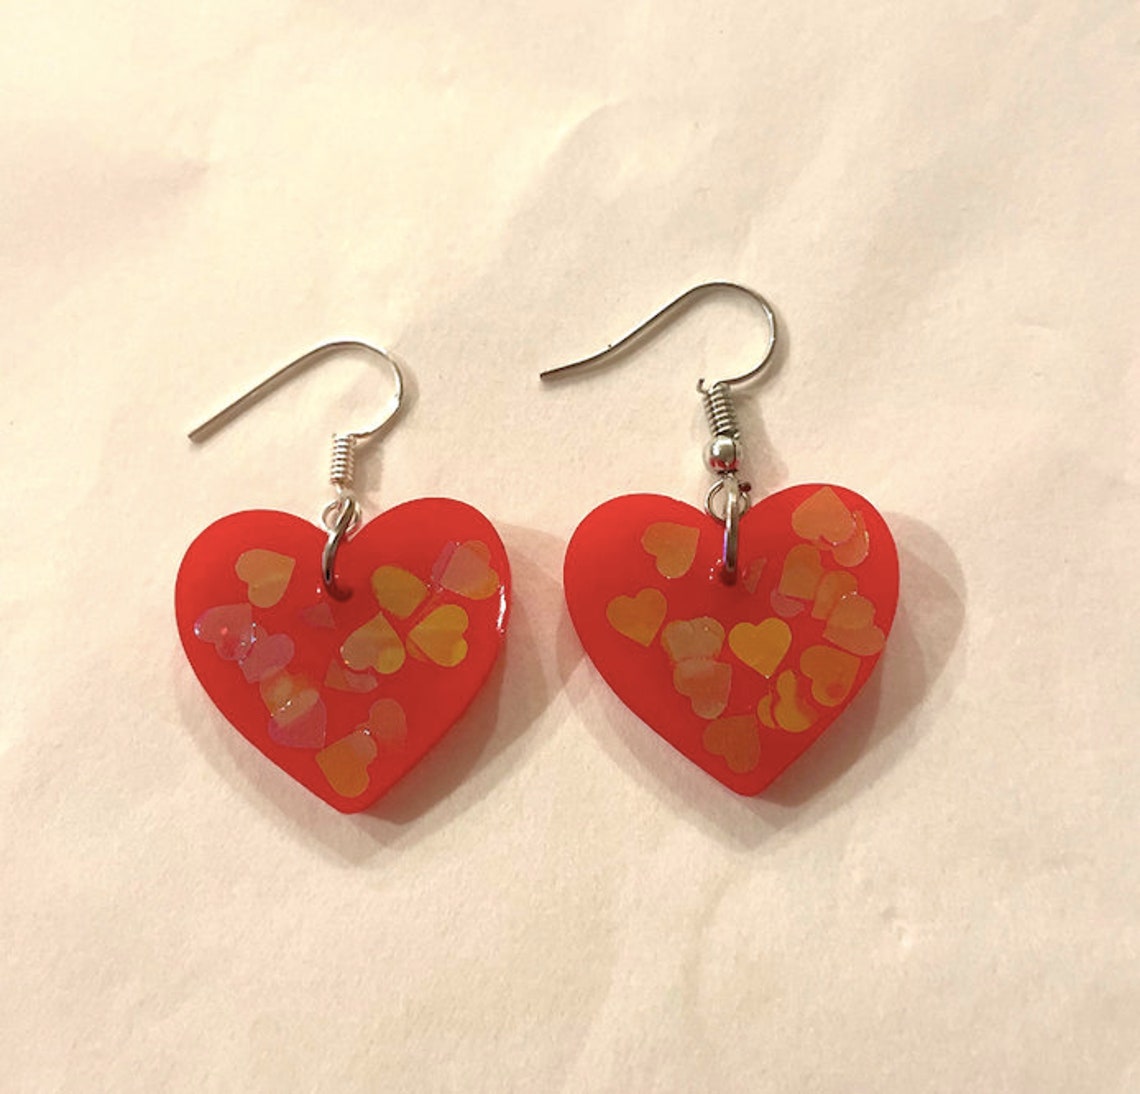 Red Heart Earrings with Heart Detail | Etsy